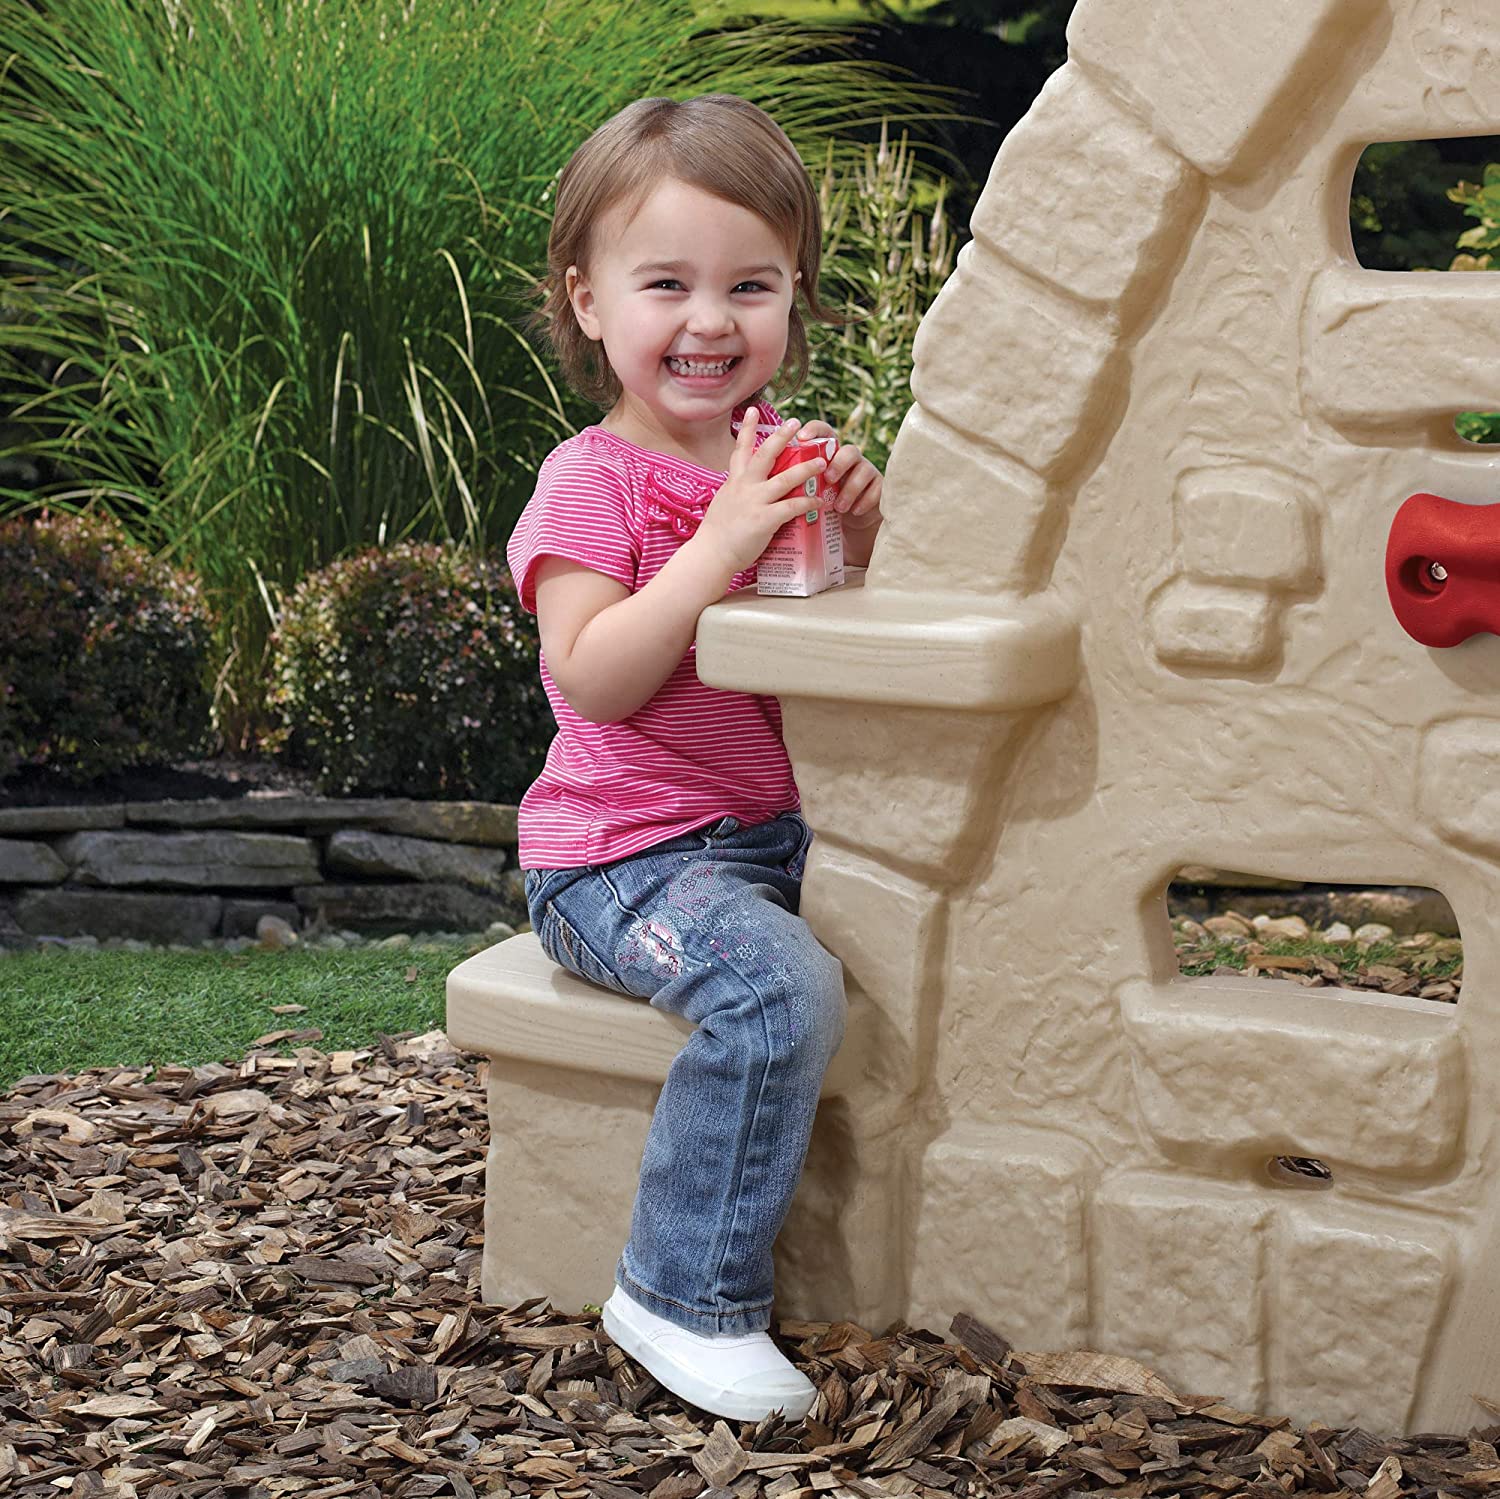 Step2 Alpine Ridge Climber and Slide Outdoor Play Toy for Kids